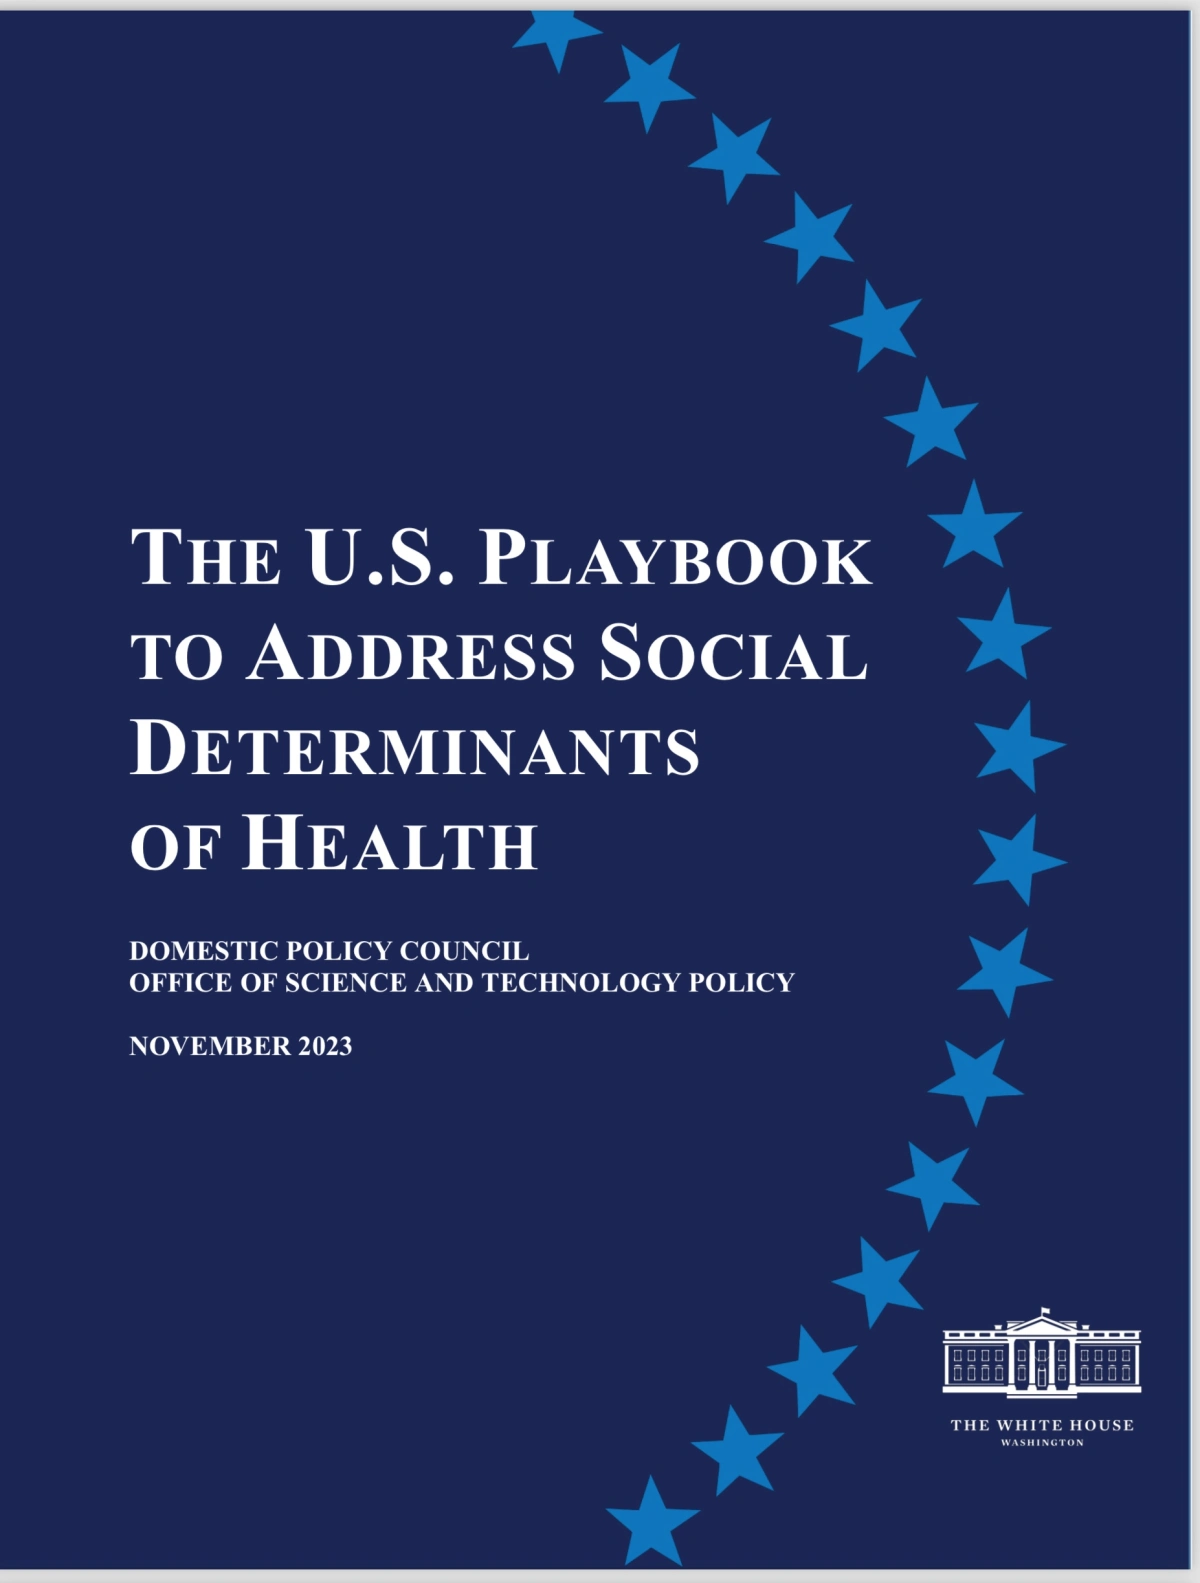 The U.S. Playbook to Address the SDoH: Launchpad vs. Final Comprehensive Strategy